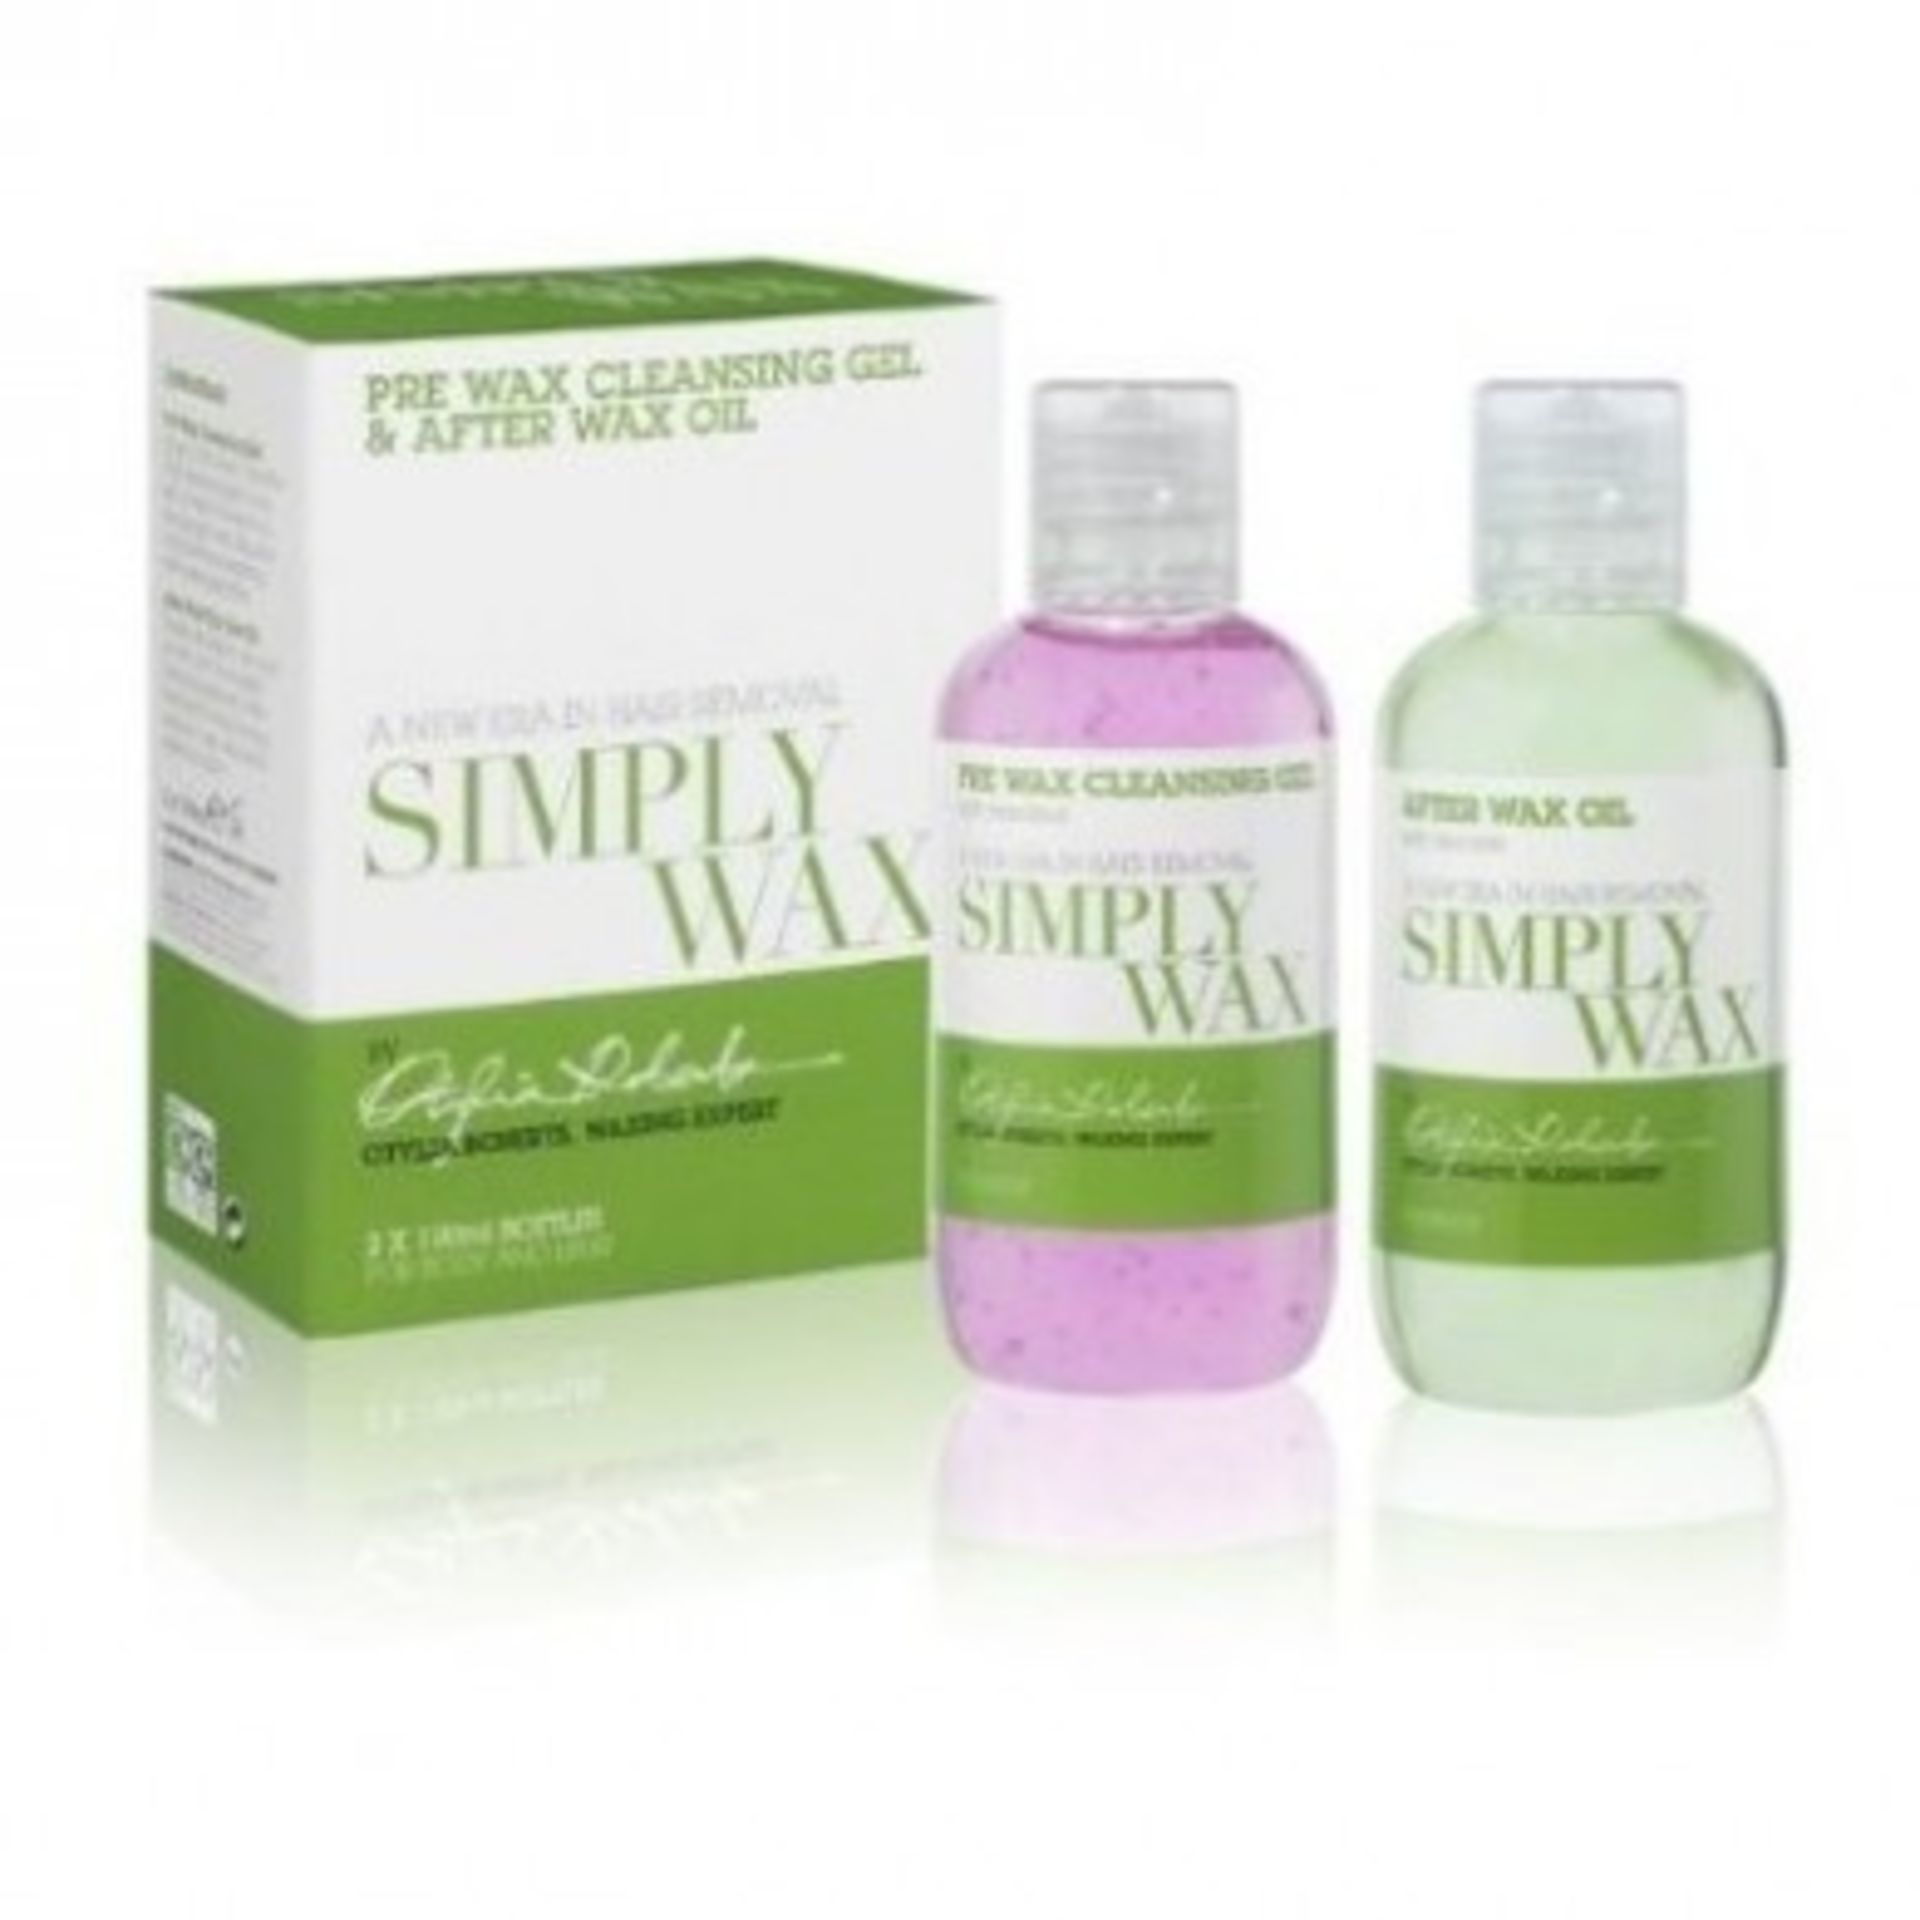 00 x Simply Was Sets – Pre wax cleansing gel and wax oil- 2 x 100ml set – NO VAT – UK Delivery £40